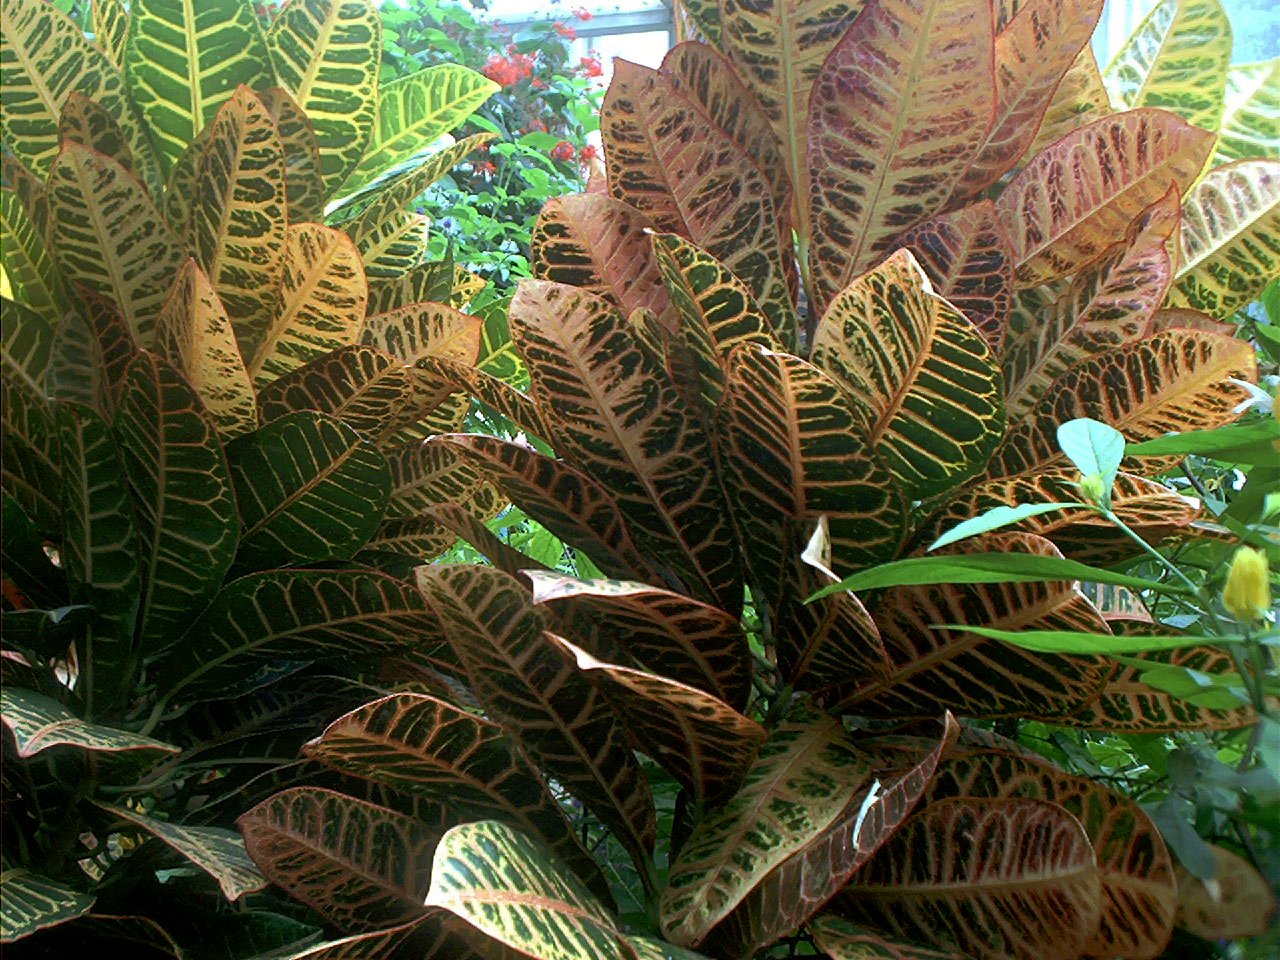 Tropical plants photographed inside the Butterfly Center at Callaway